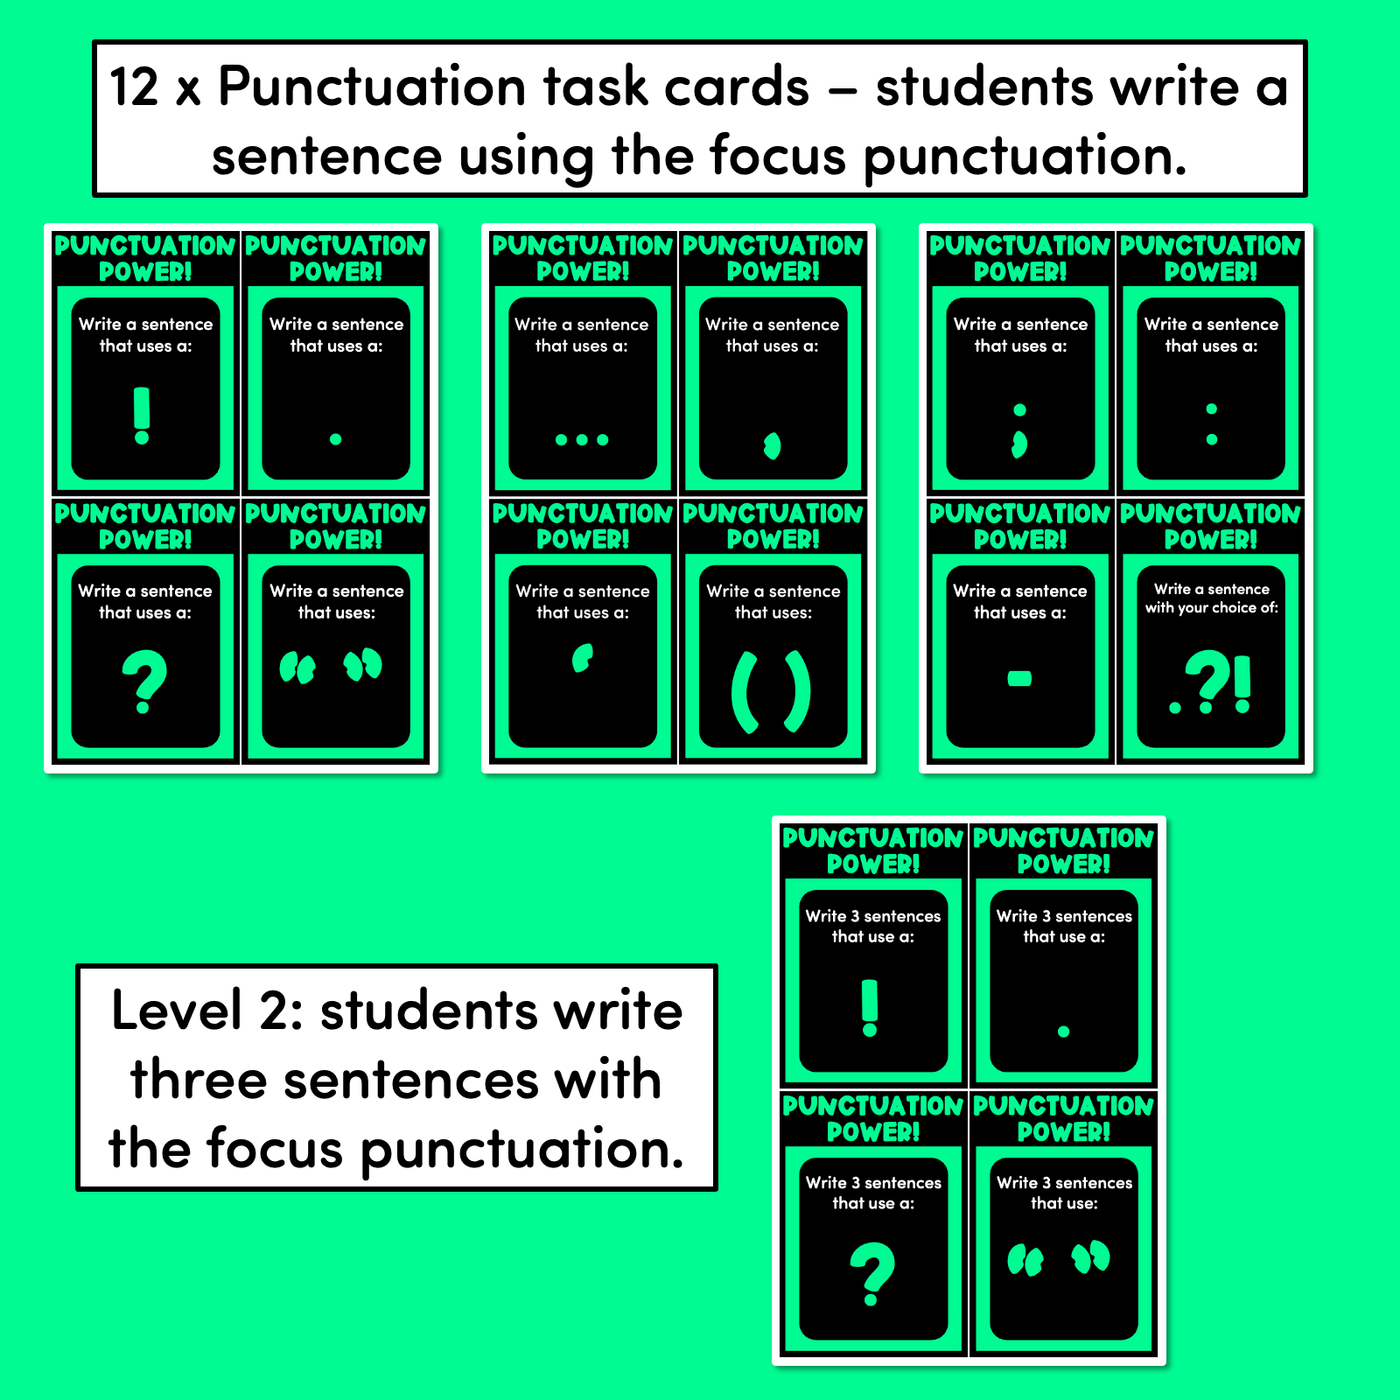 Punctuation Writing Prompt Task Cards - VCOP aligned